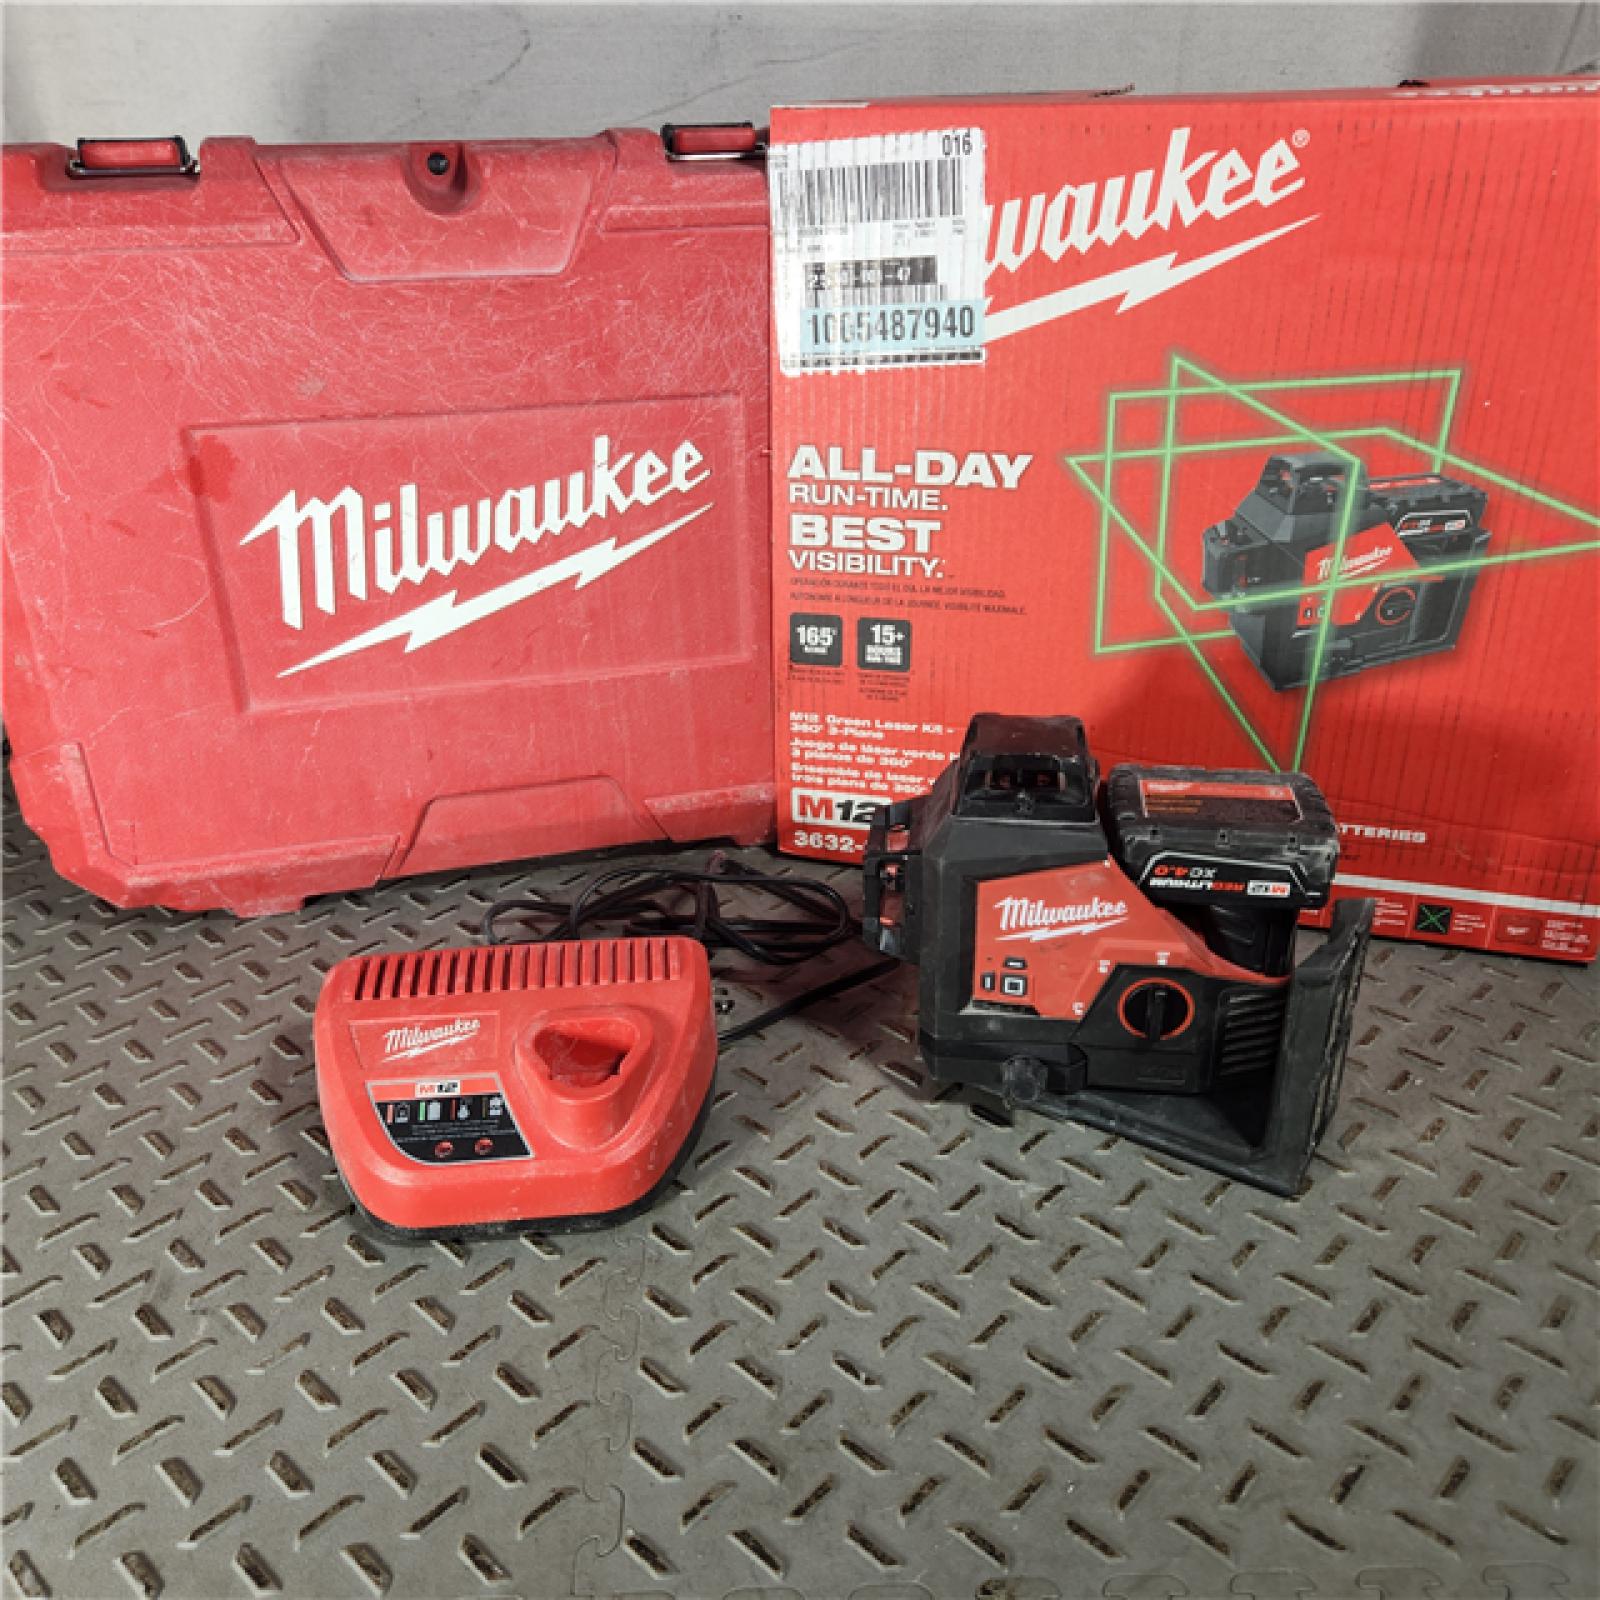 Houston Location - AS-IS Milwaukee-3632-21 M12 Green Beam Laser 360 3-Plane Kit - Appears IN USED Condition